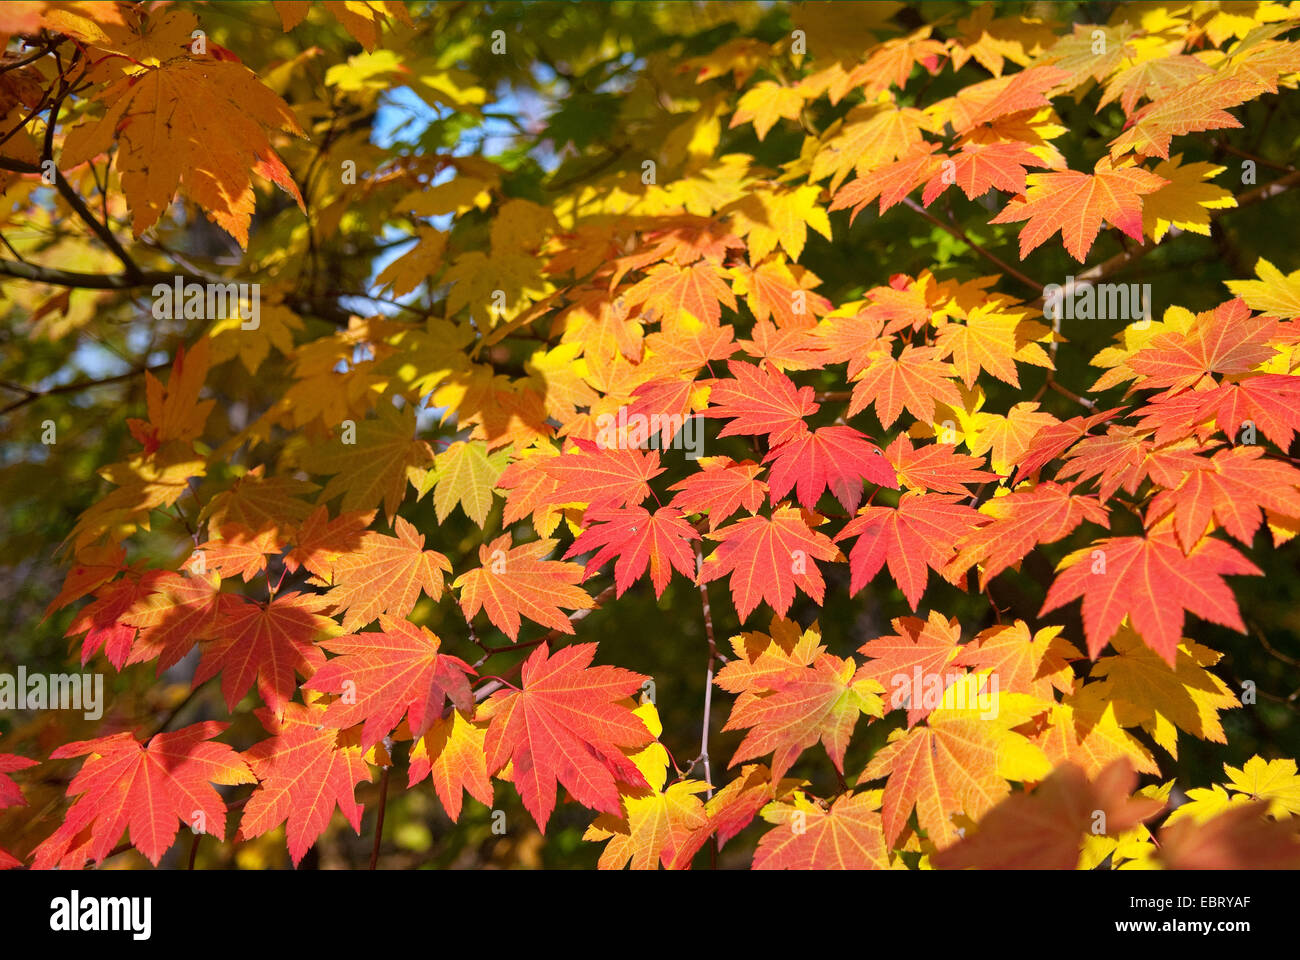 Japanese maple (Acer japonicum), branch with autumn leaves Stock Photo